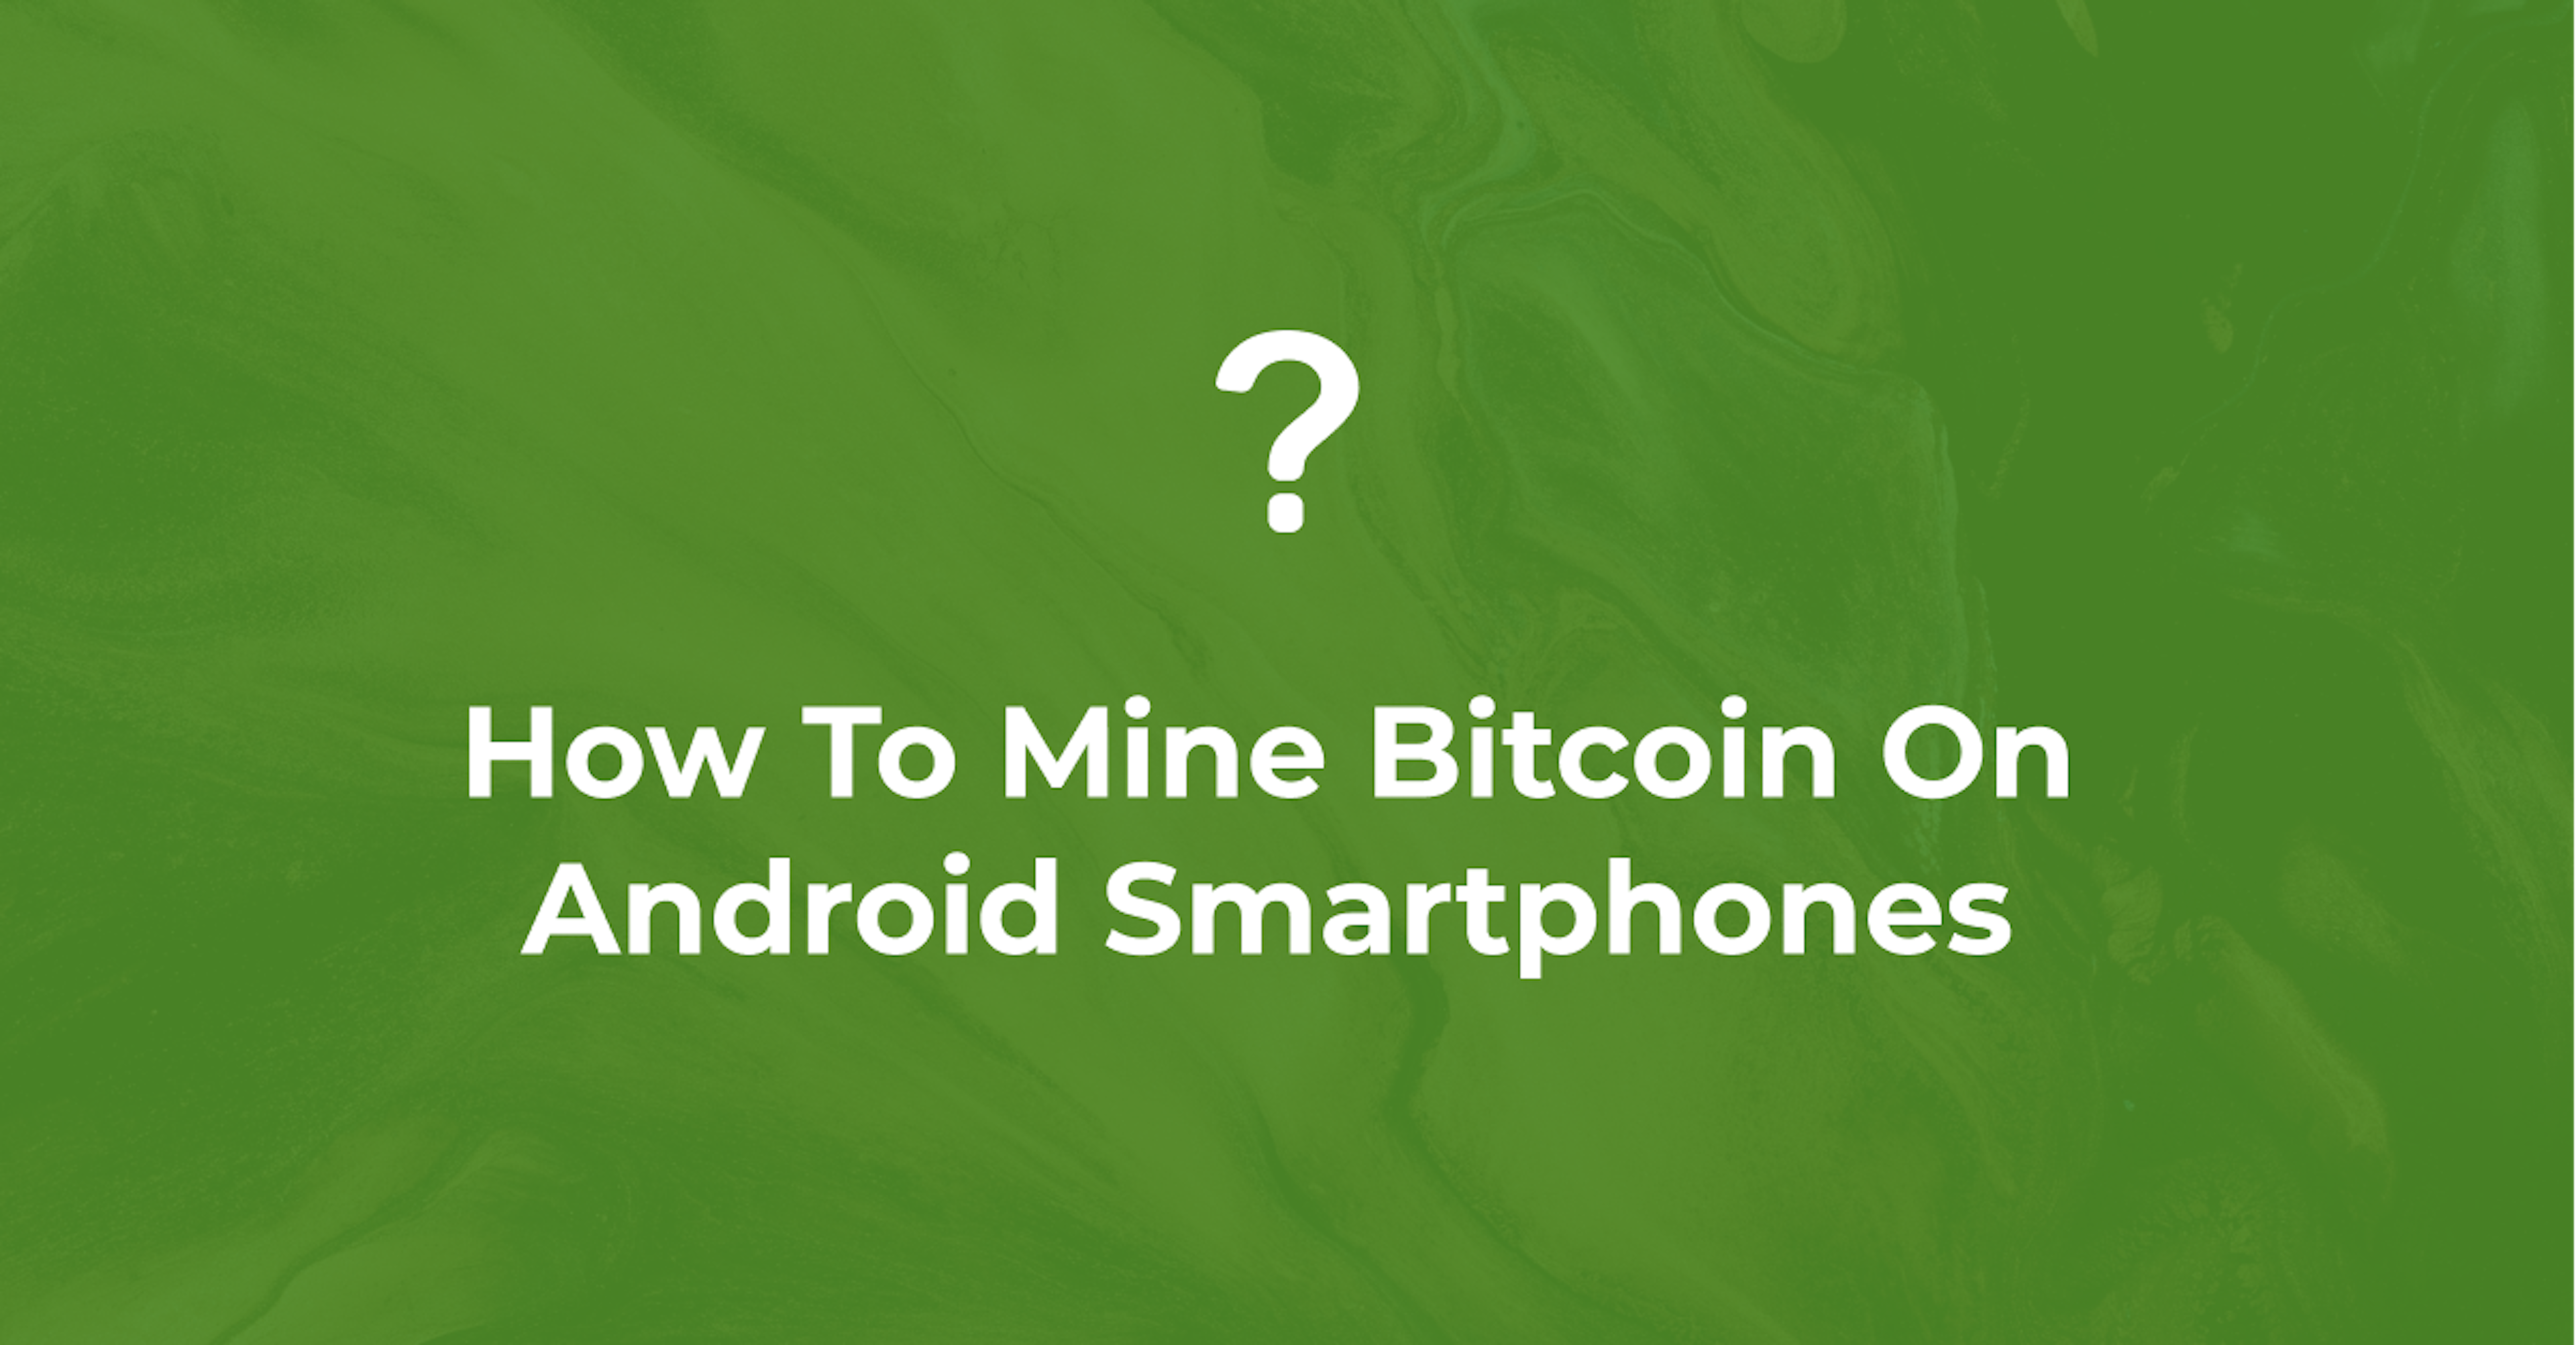 How To Mine Bitcoin On Android Smartphones | Smart Guide